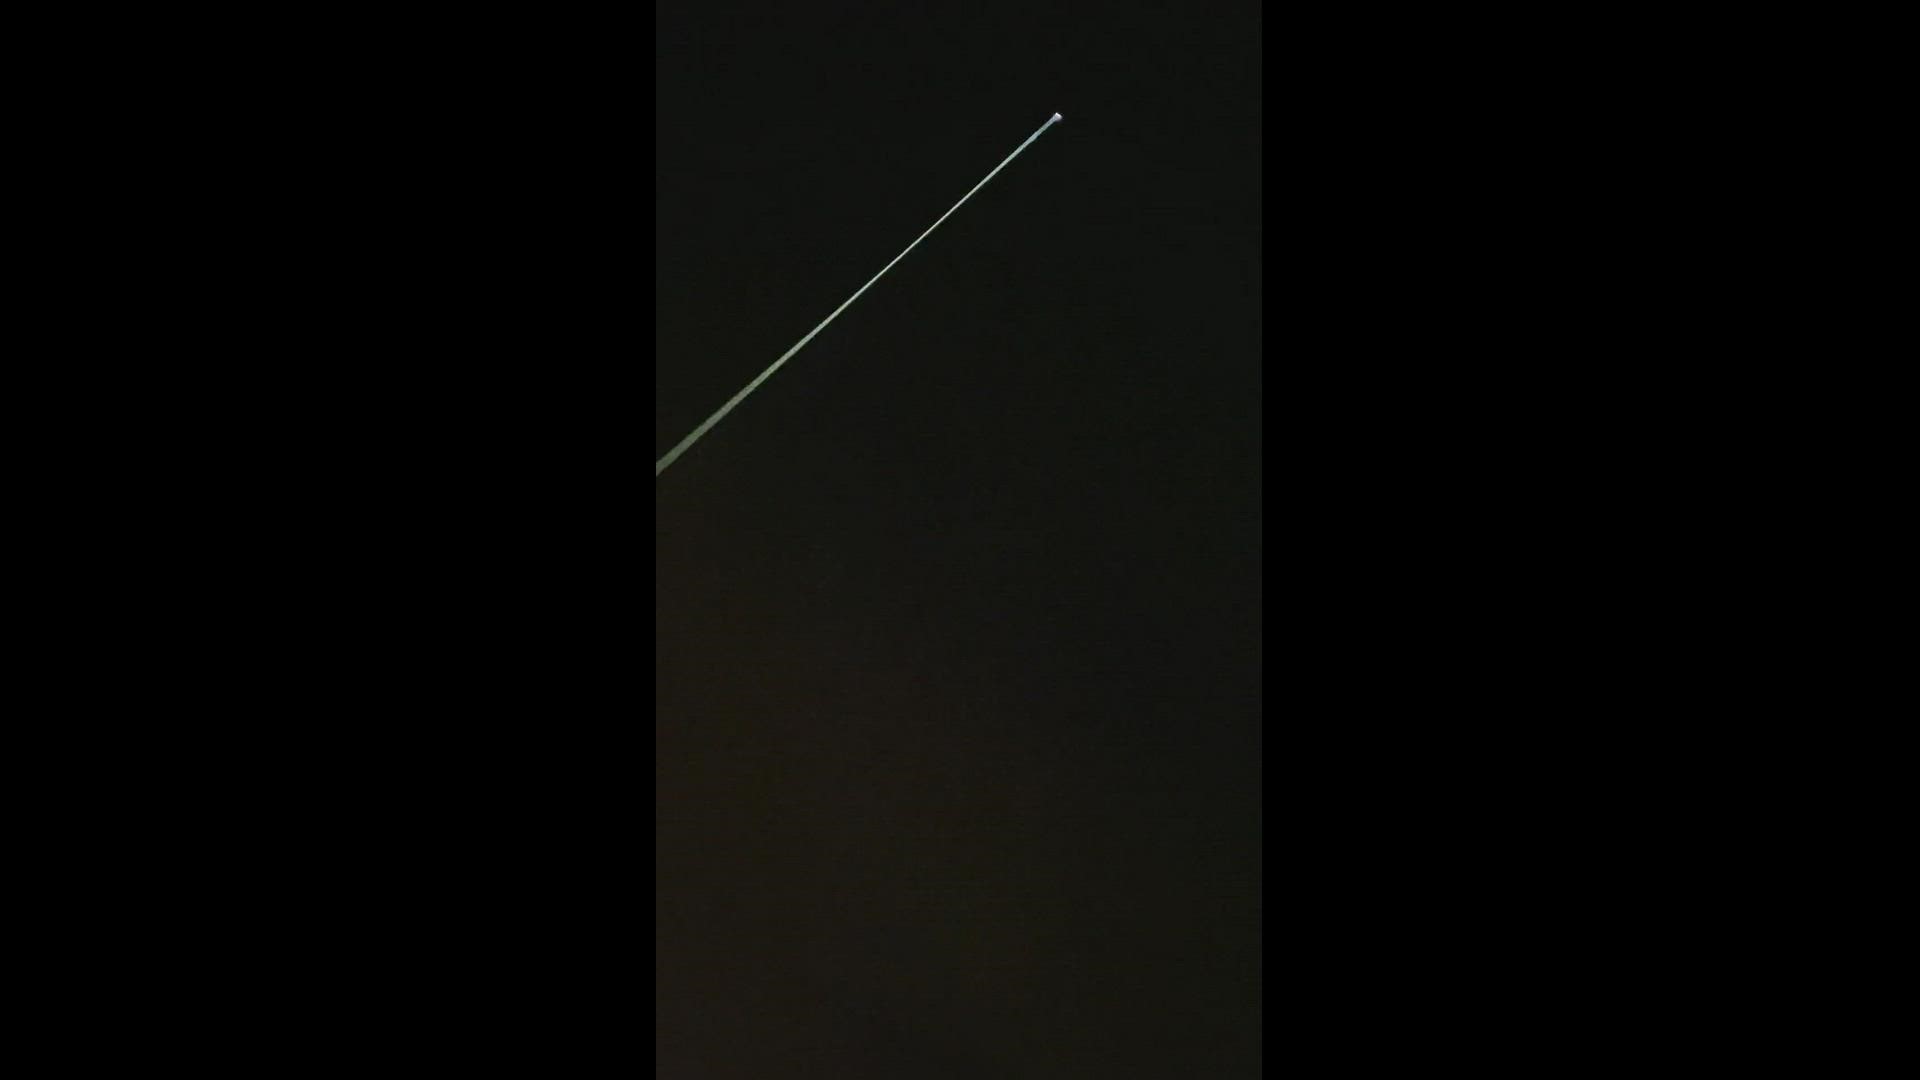 Viewer captures SpaceX Dragon reentry after ISS mission
Credit: Nick